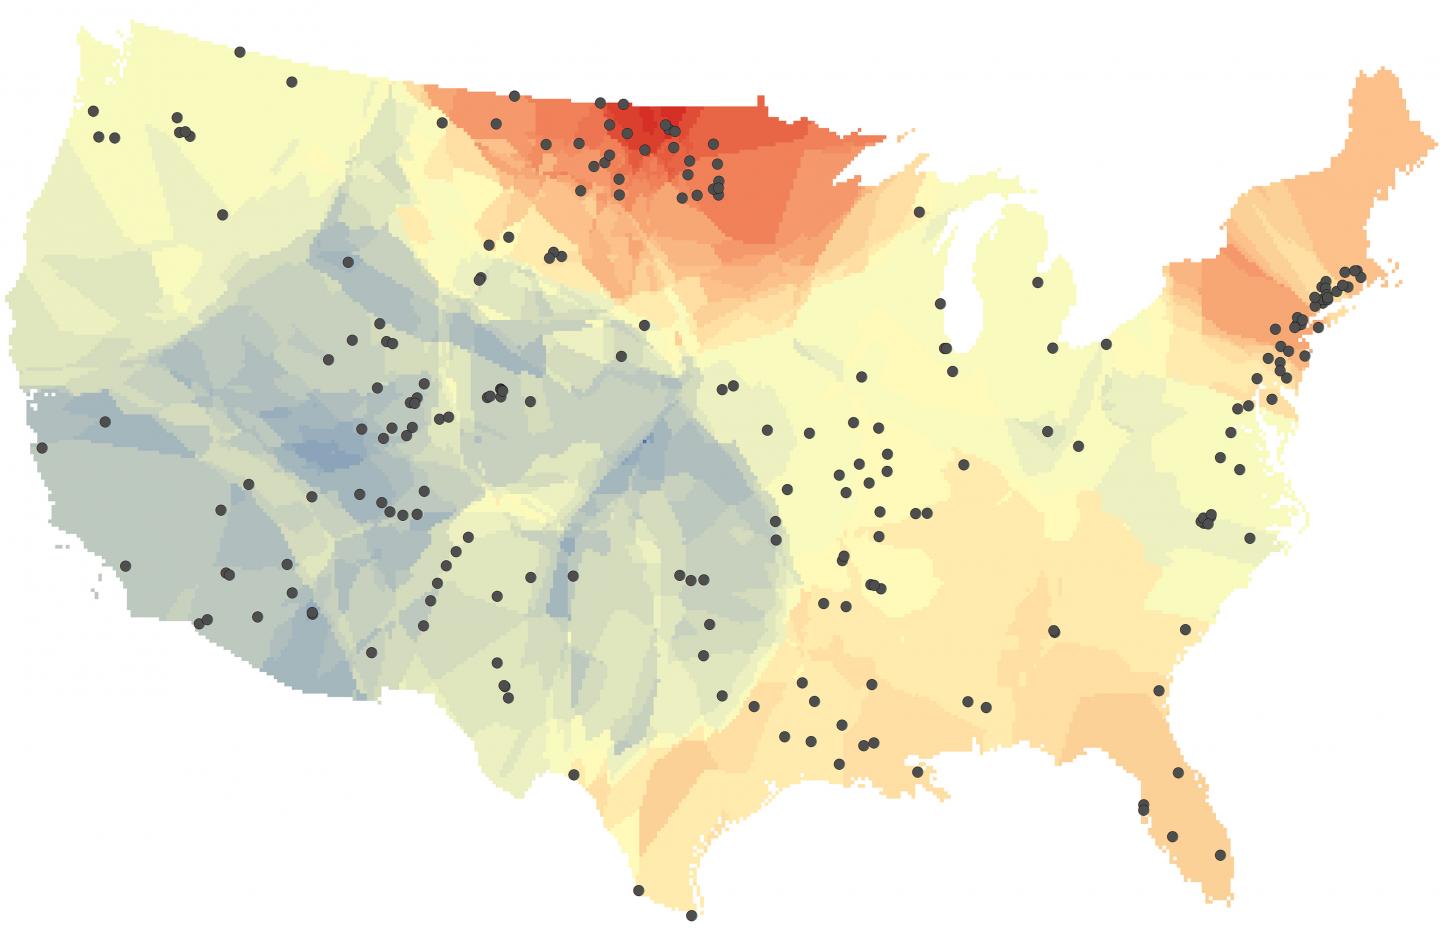 Changes in the Salt Content of Fresh Water in Rivers and Streams across the United States